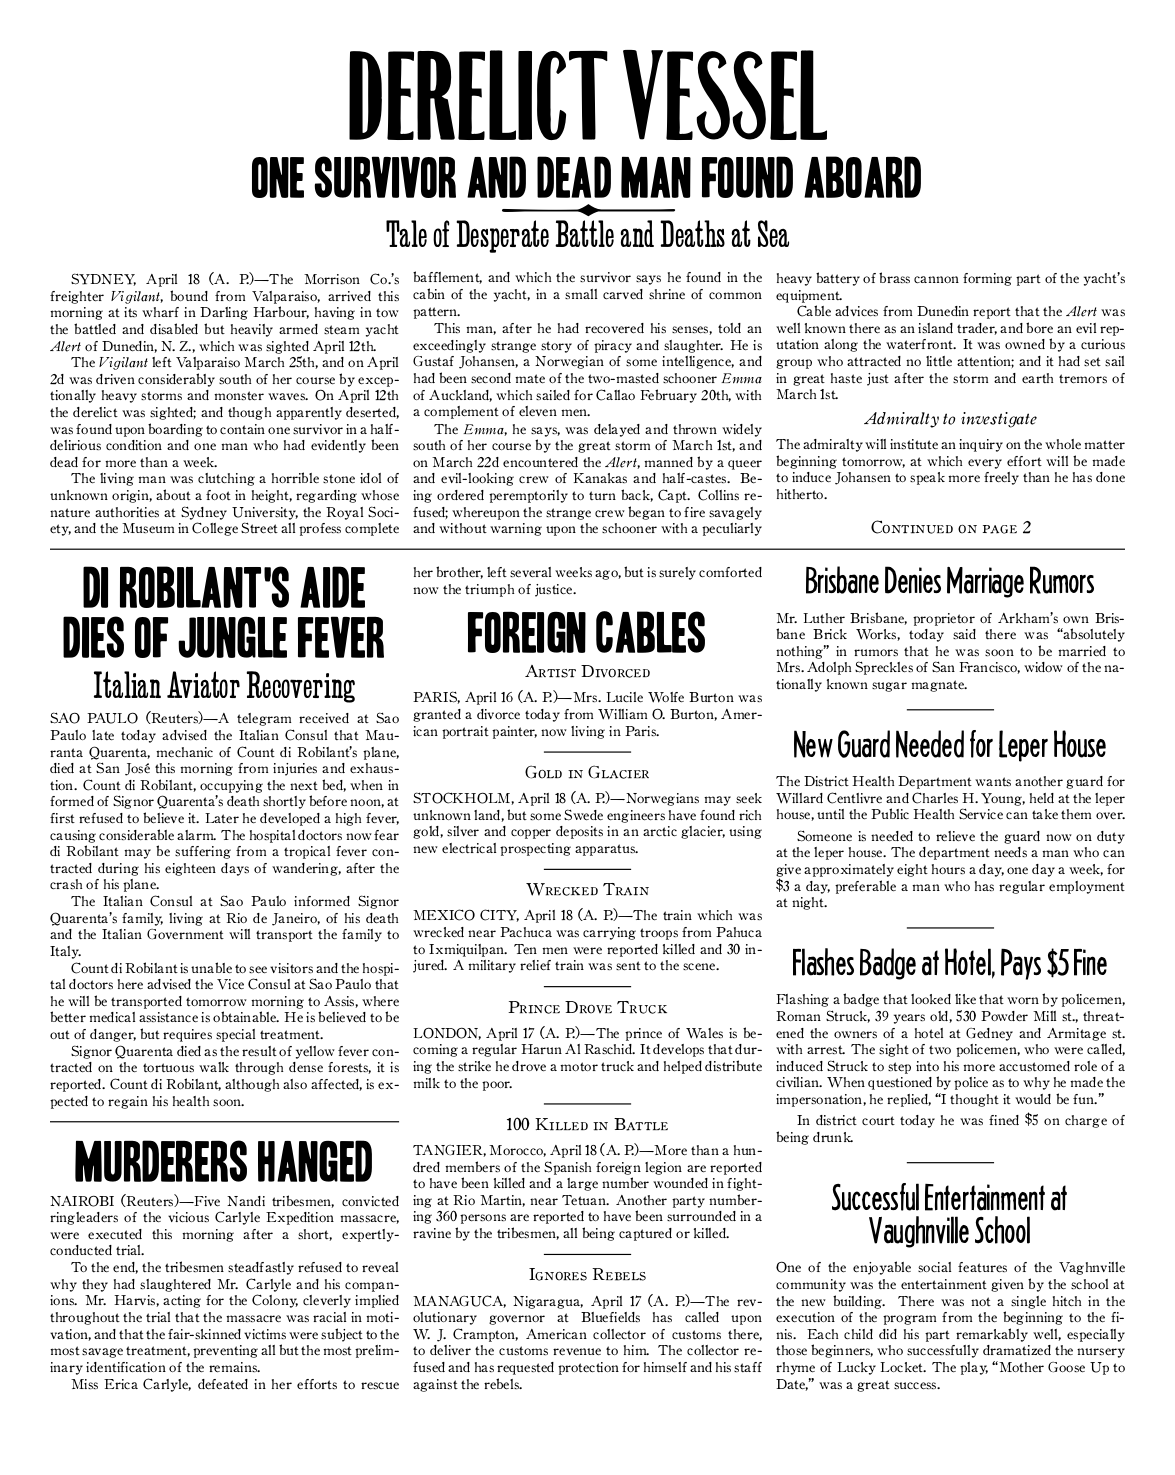 newspaper-3colspread.png